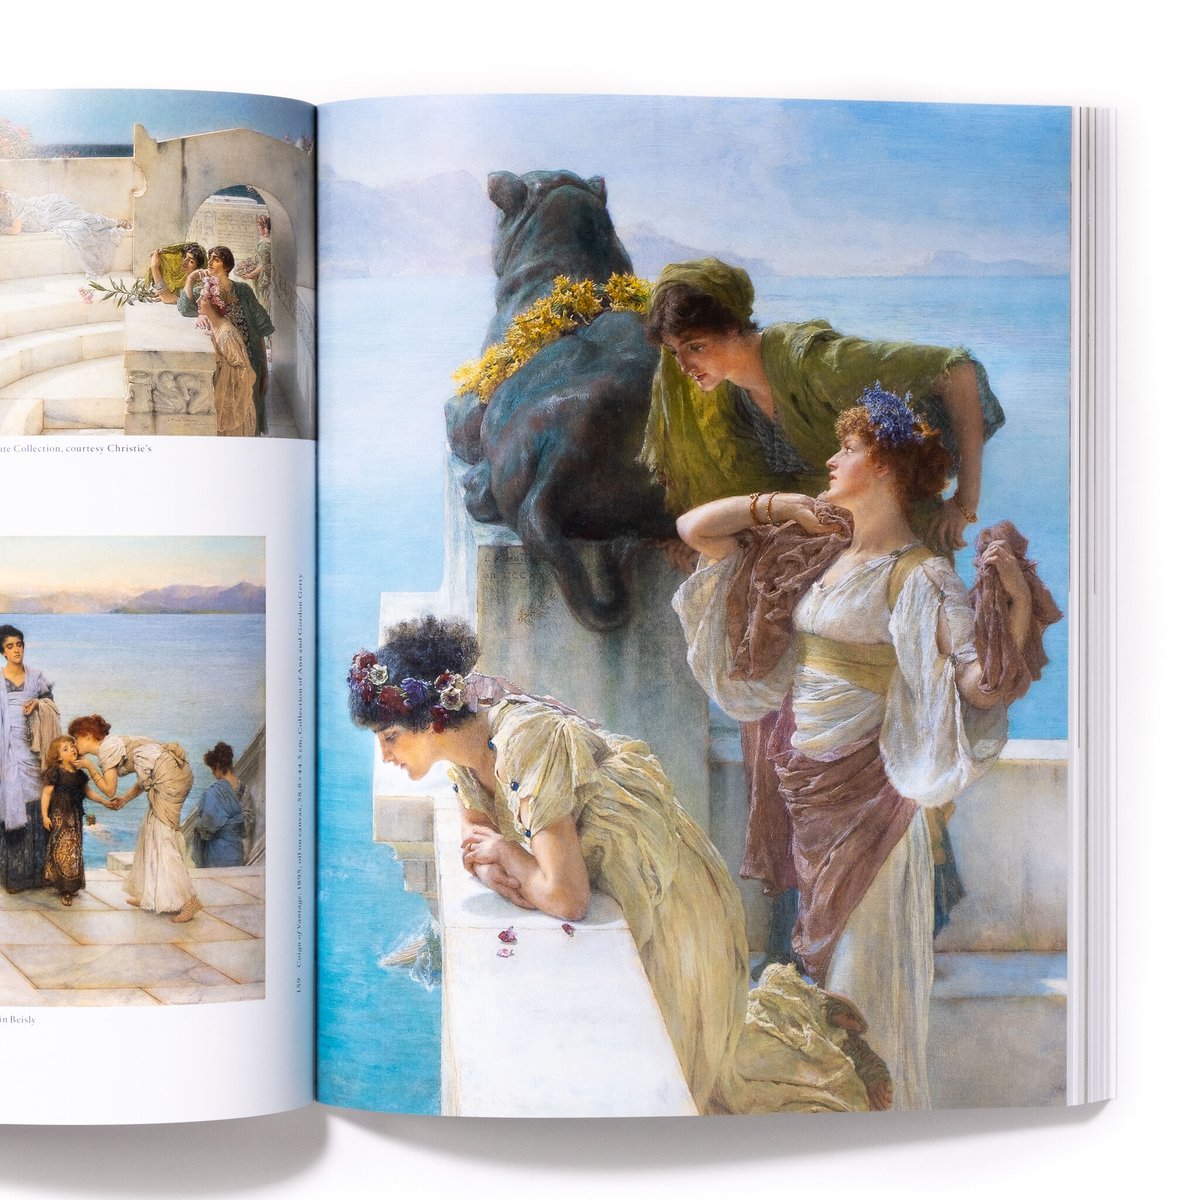 Lawrence Alma-Tadema : At Home in Antiquity |